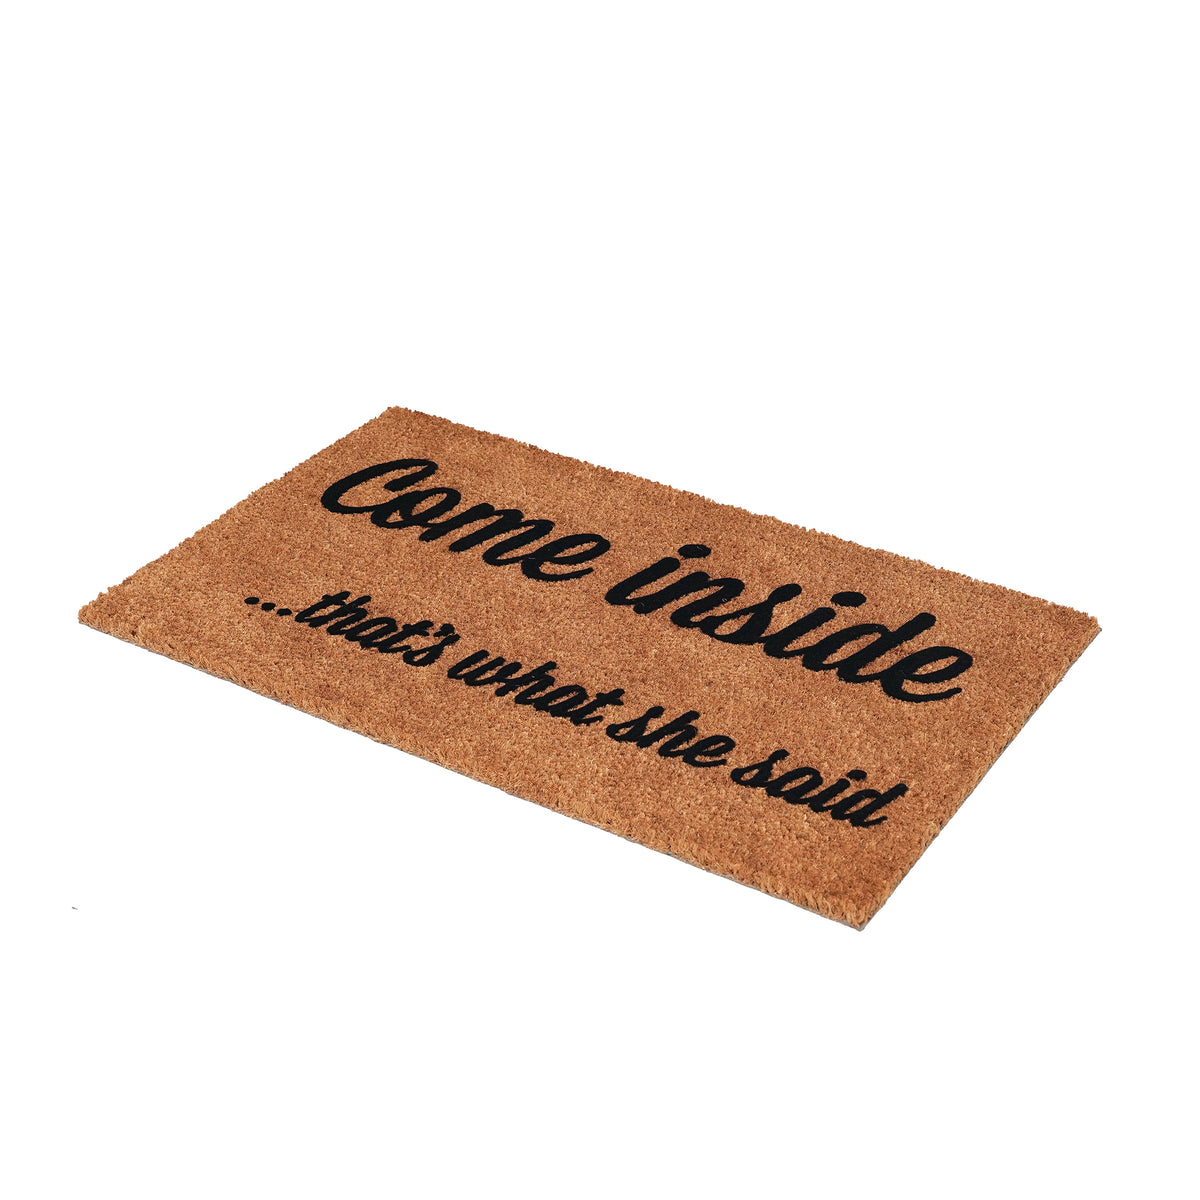 OnlyMat COME INSIDE thats what she said funny Naughty Natural Coir Door mat